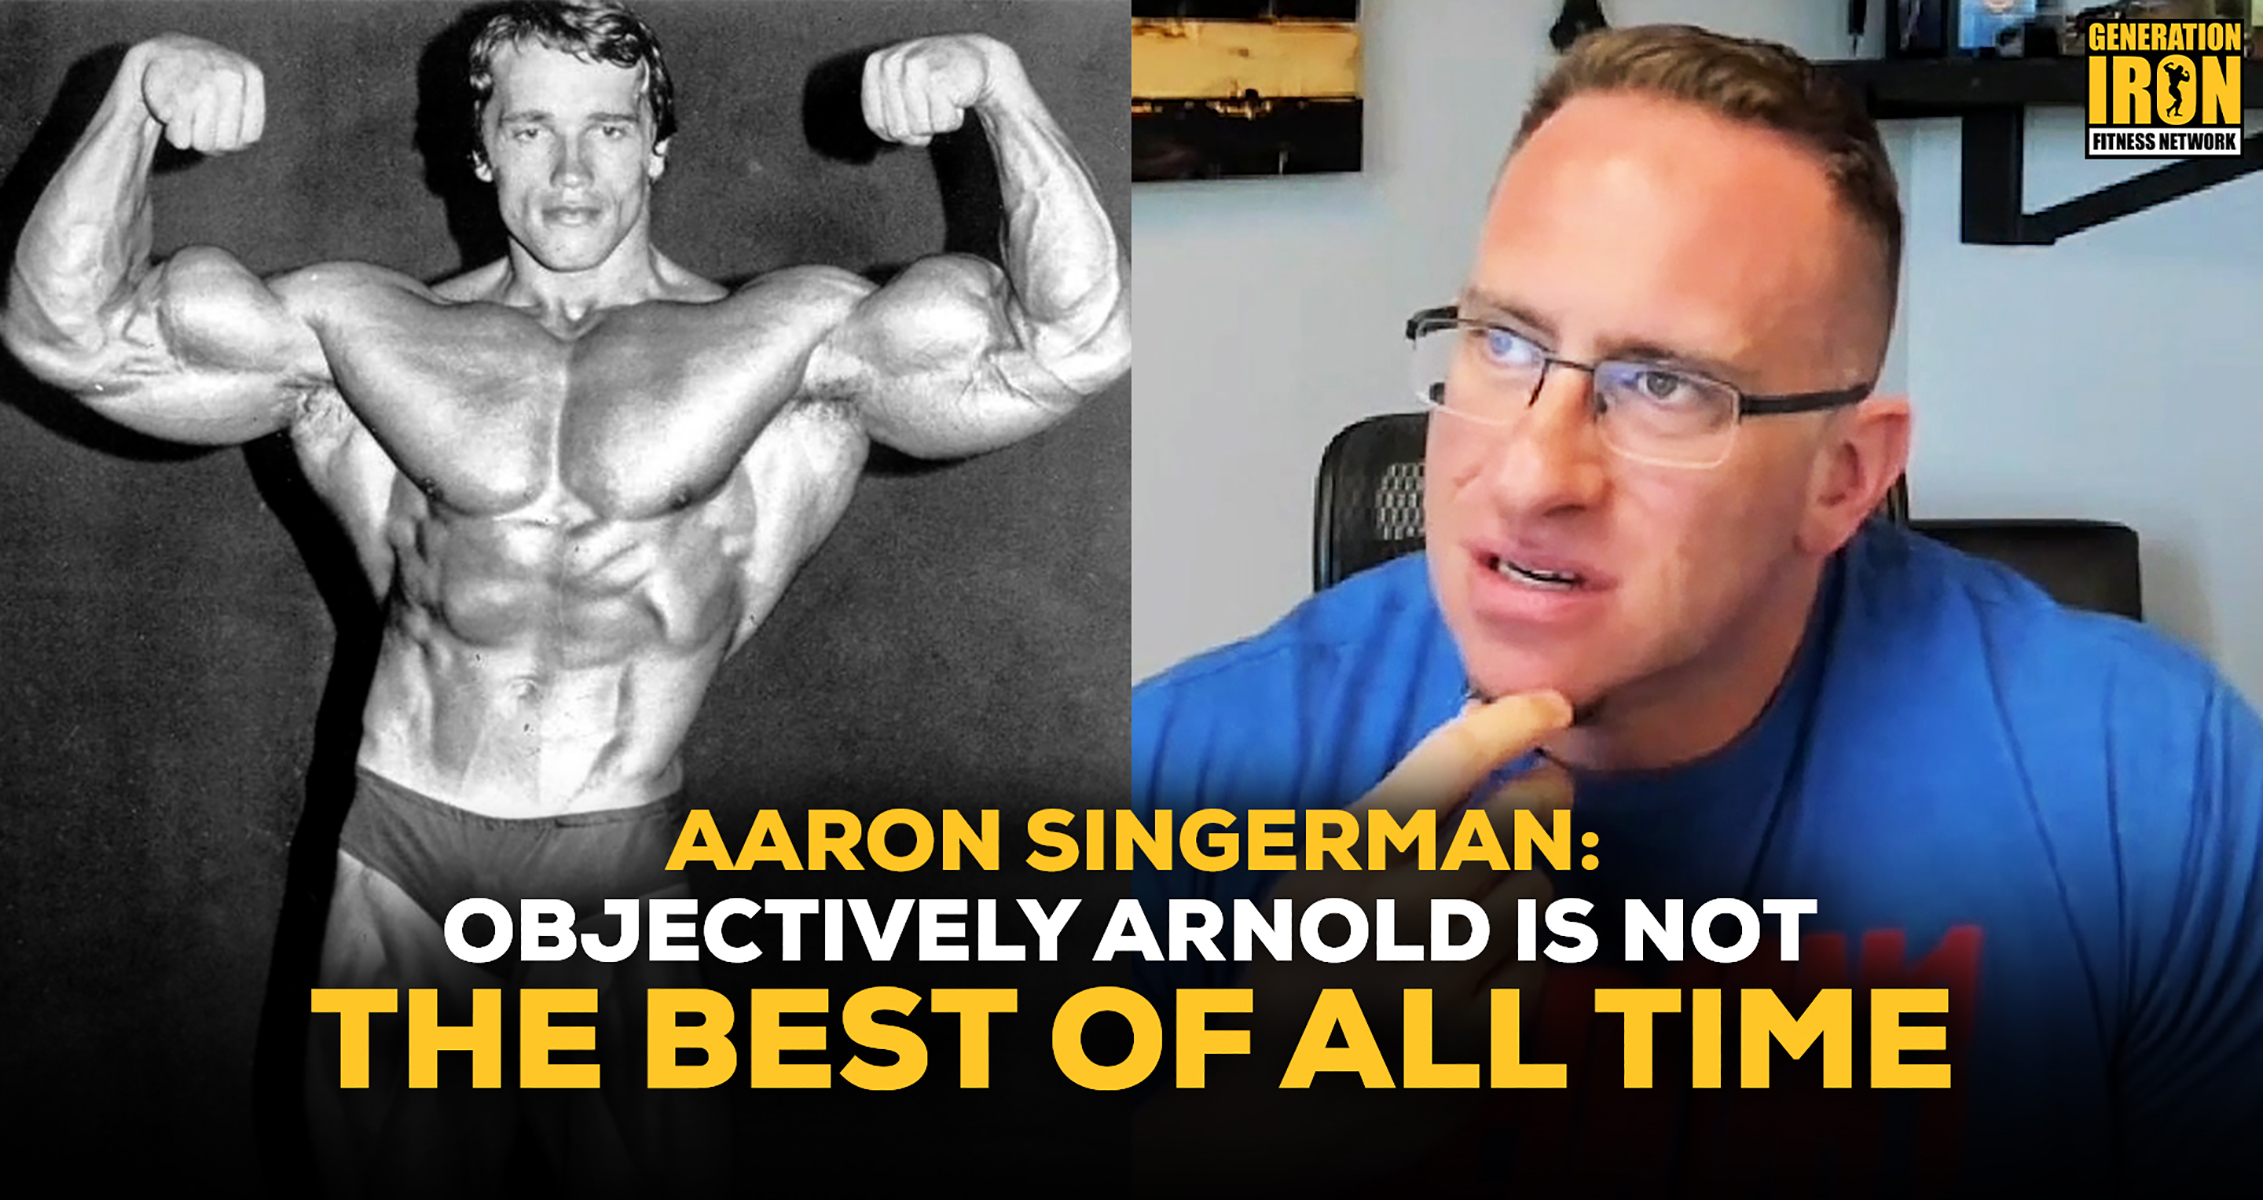 Aaron Singerman: Objectively Arnold Schwarzenegger Would Not Be In The Top 5 Bodybuilders Of All Time